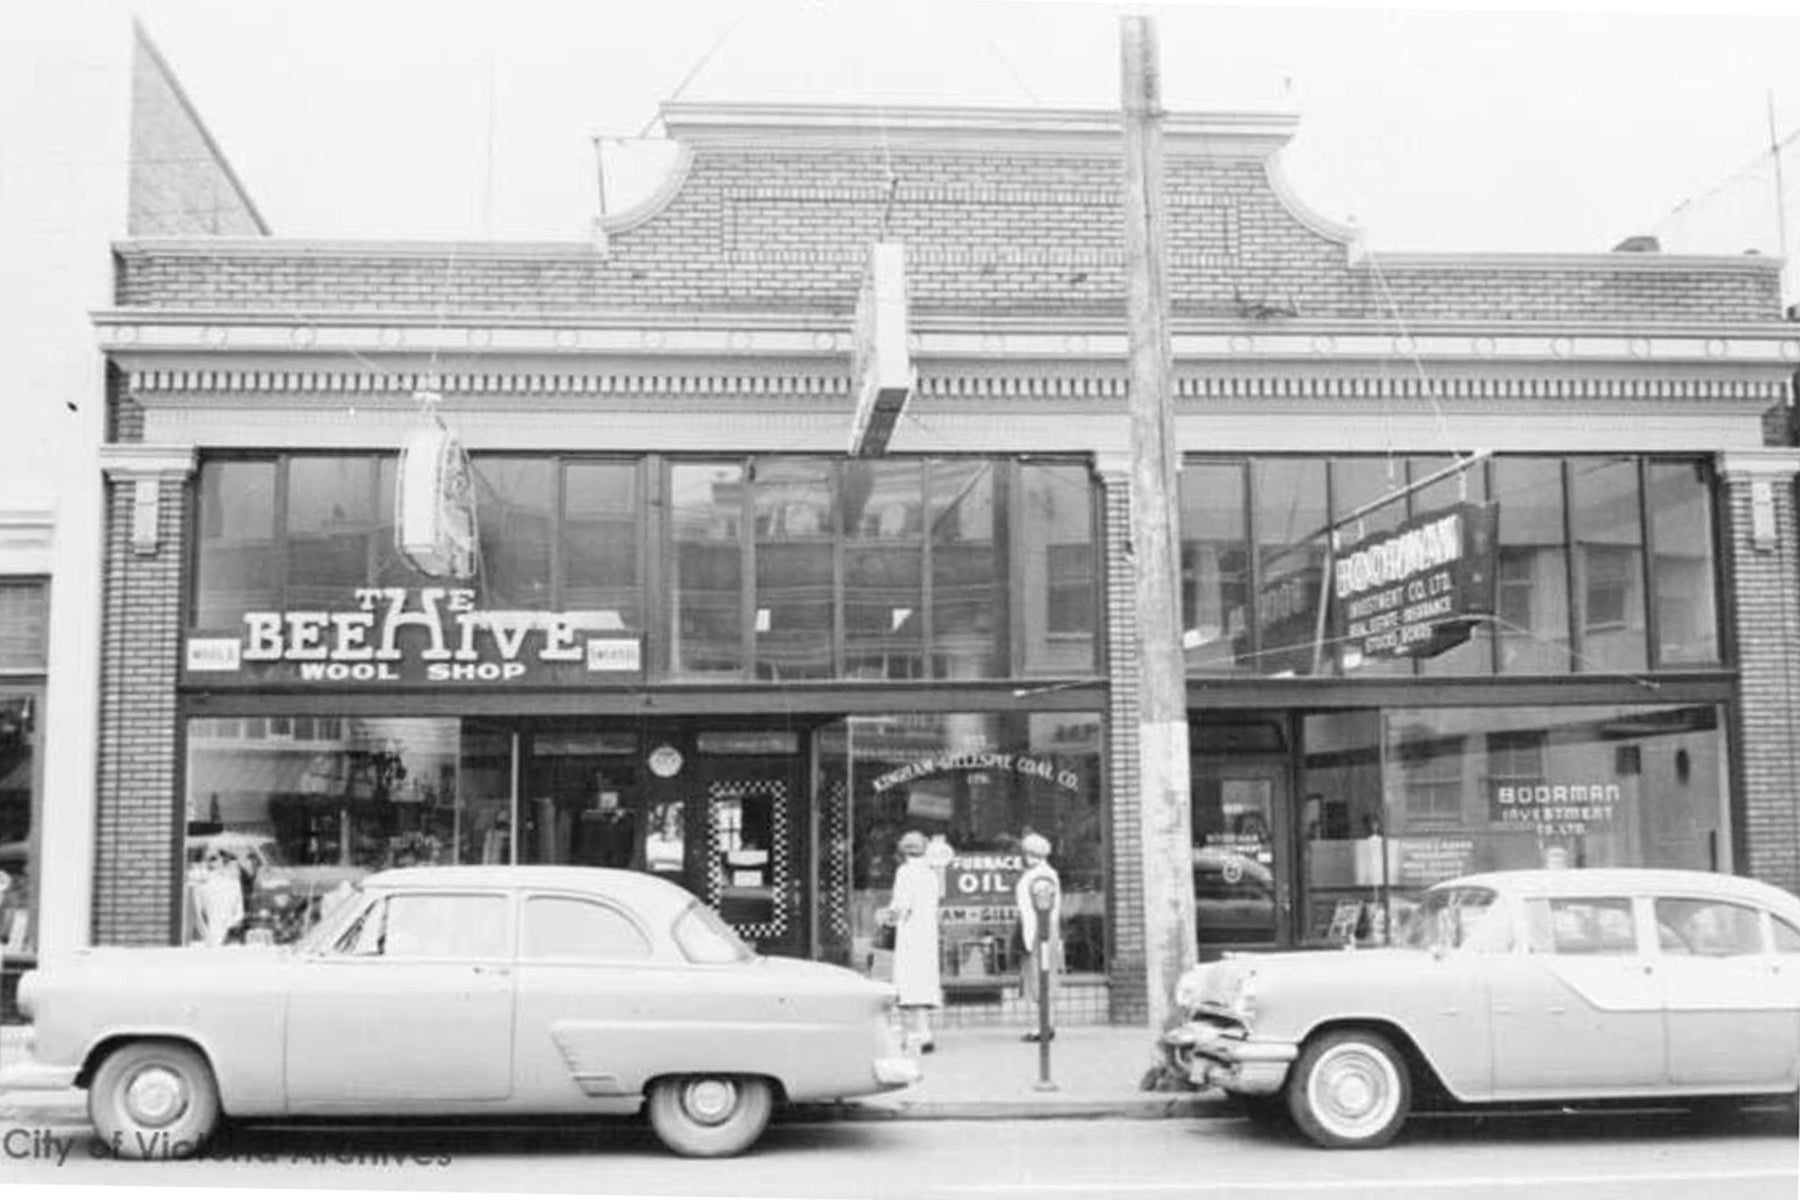 Beehive Wool Shop 1959 Fort Street Victoria BC